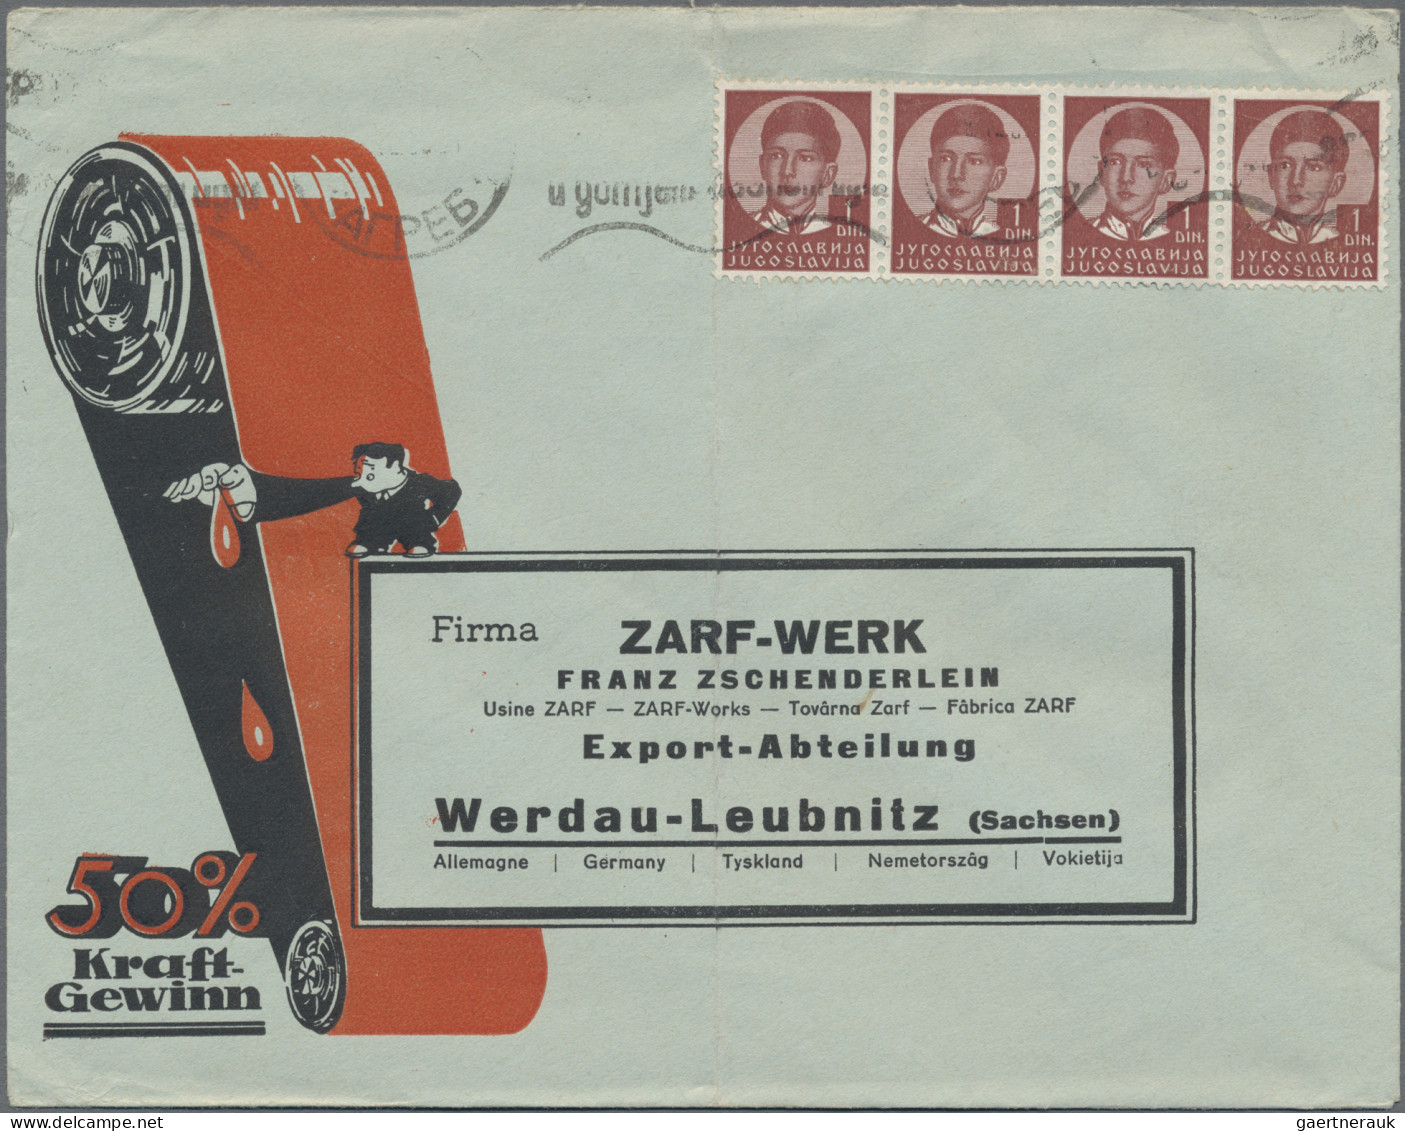 Europe: More than 600 covers, postcards and postal stationery items from Europea